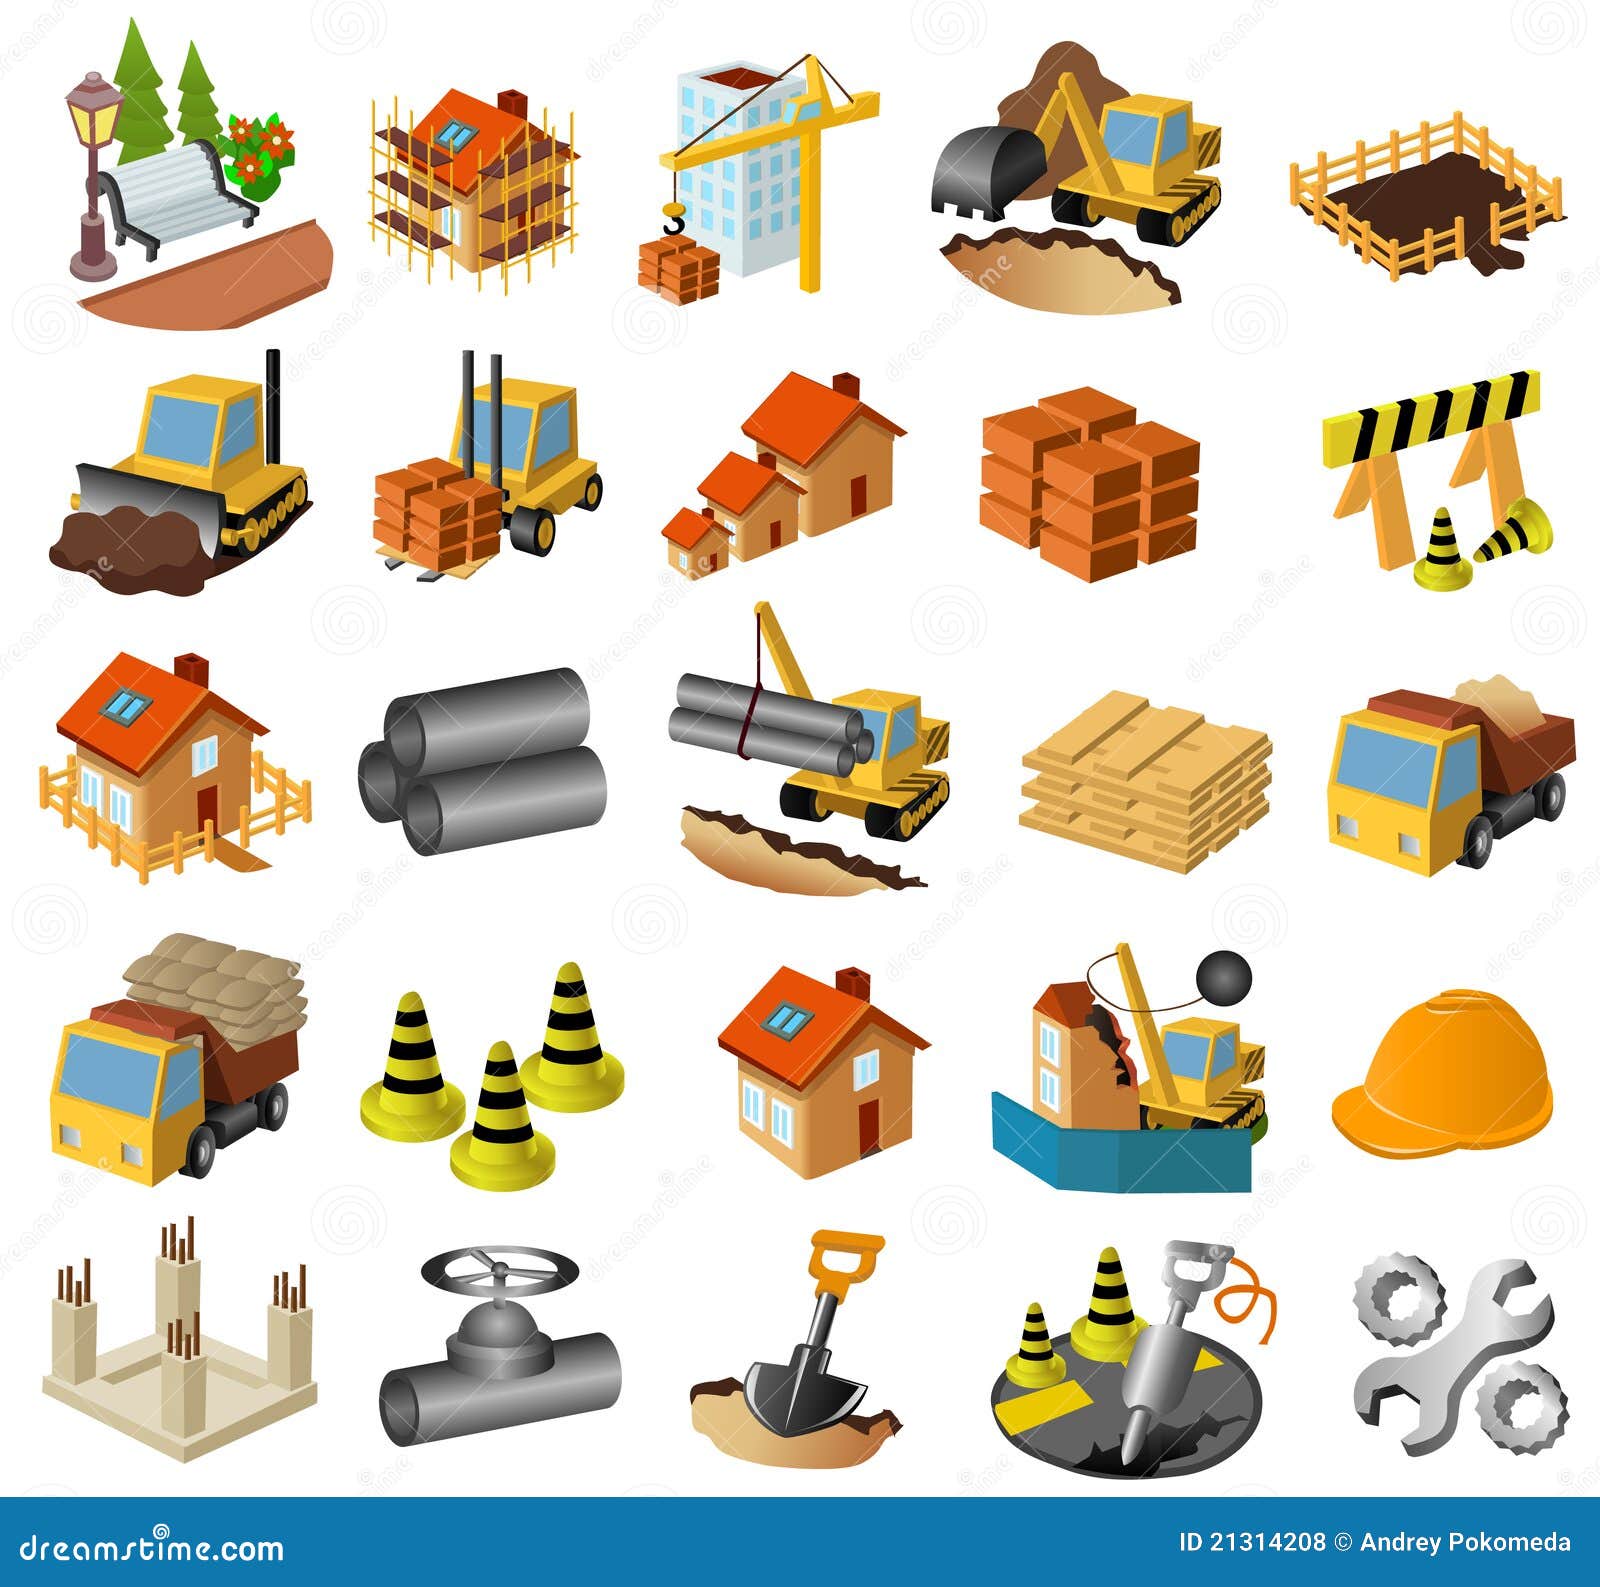 construction clipart collection - photo #23